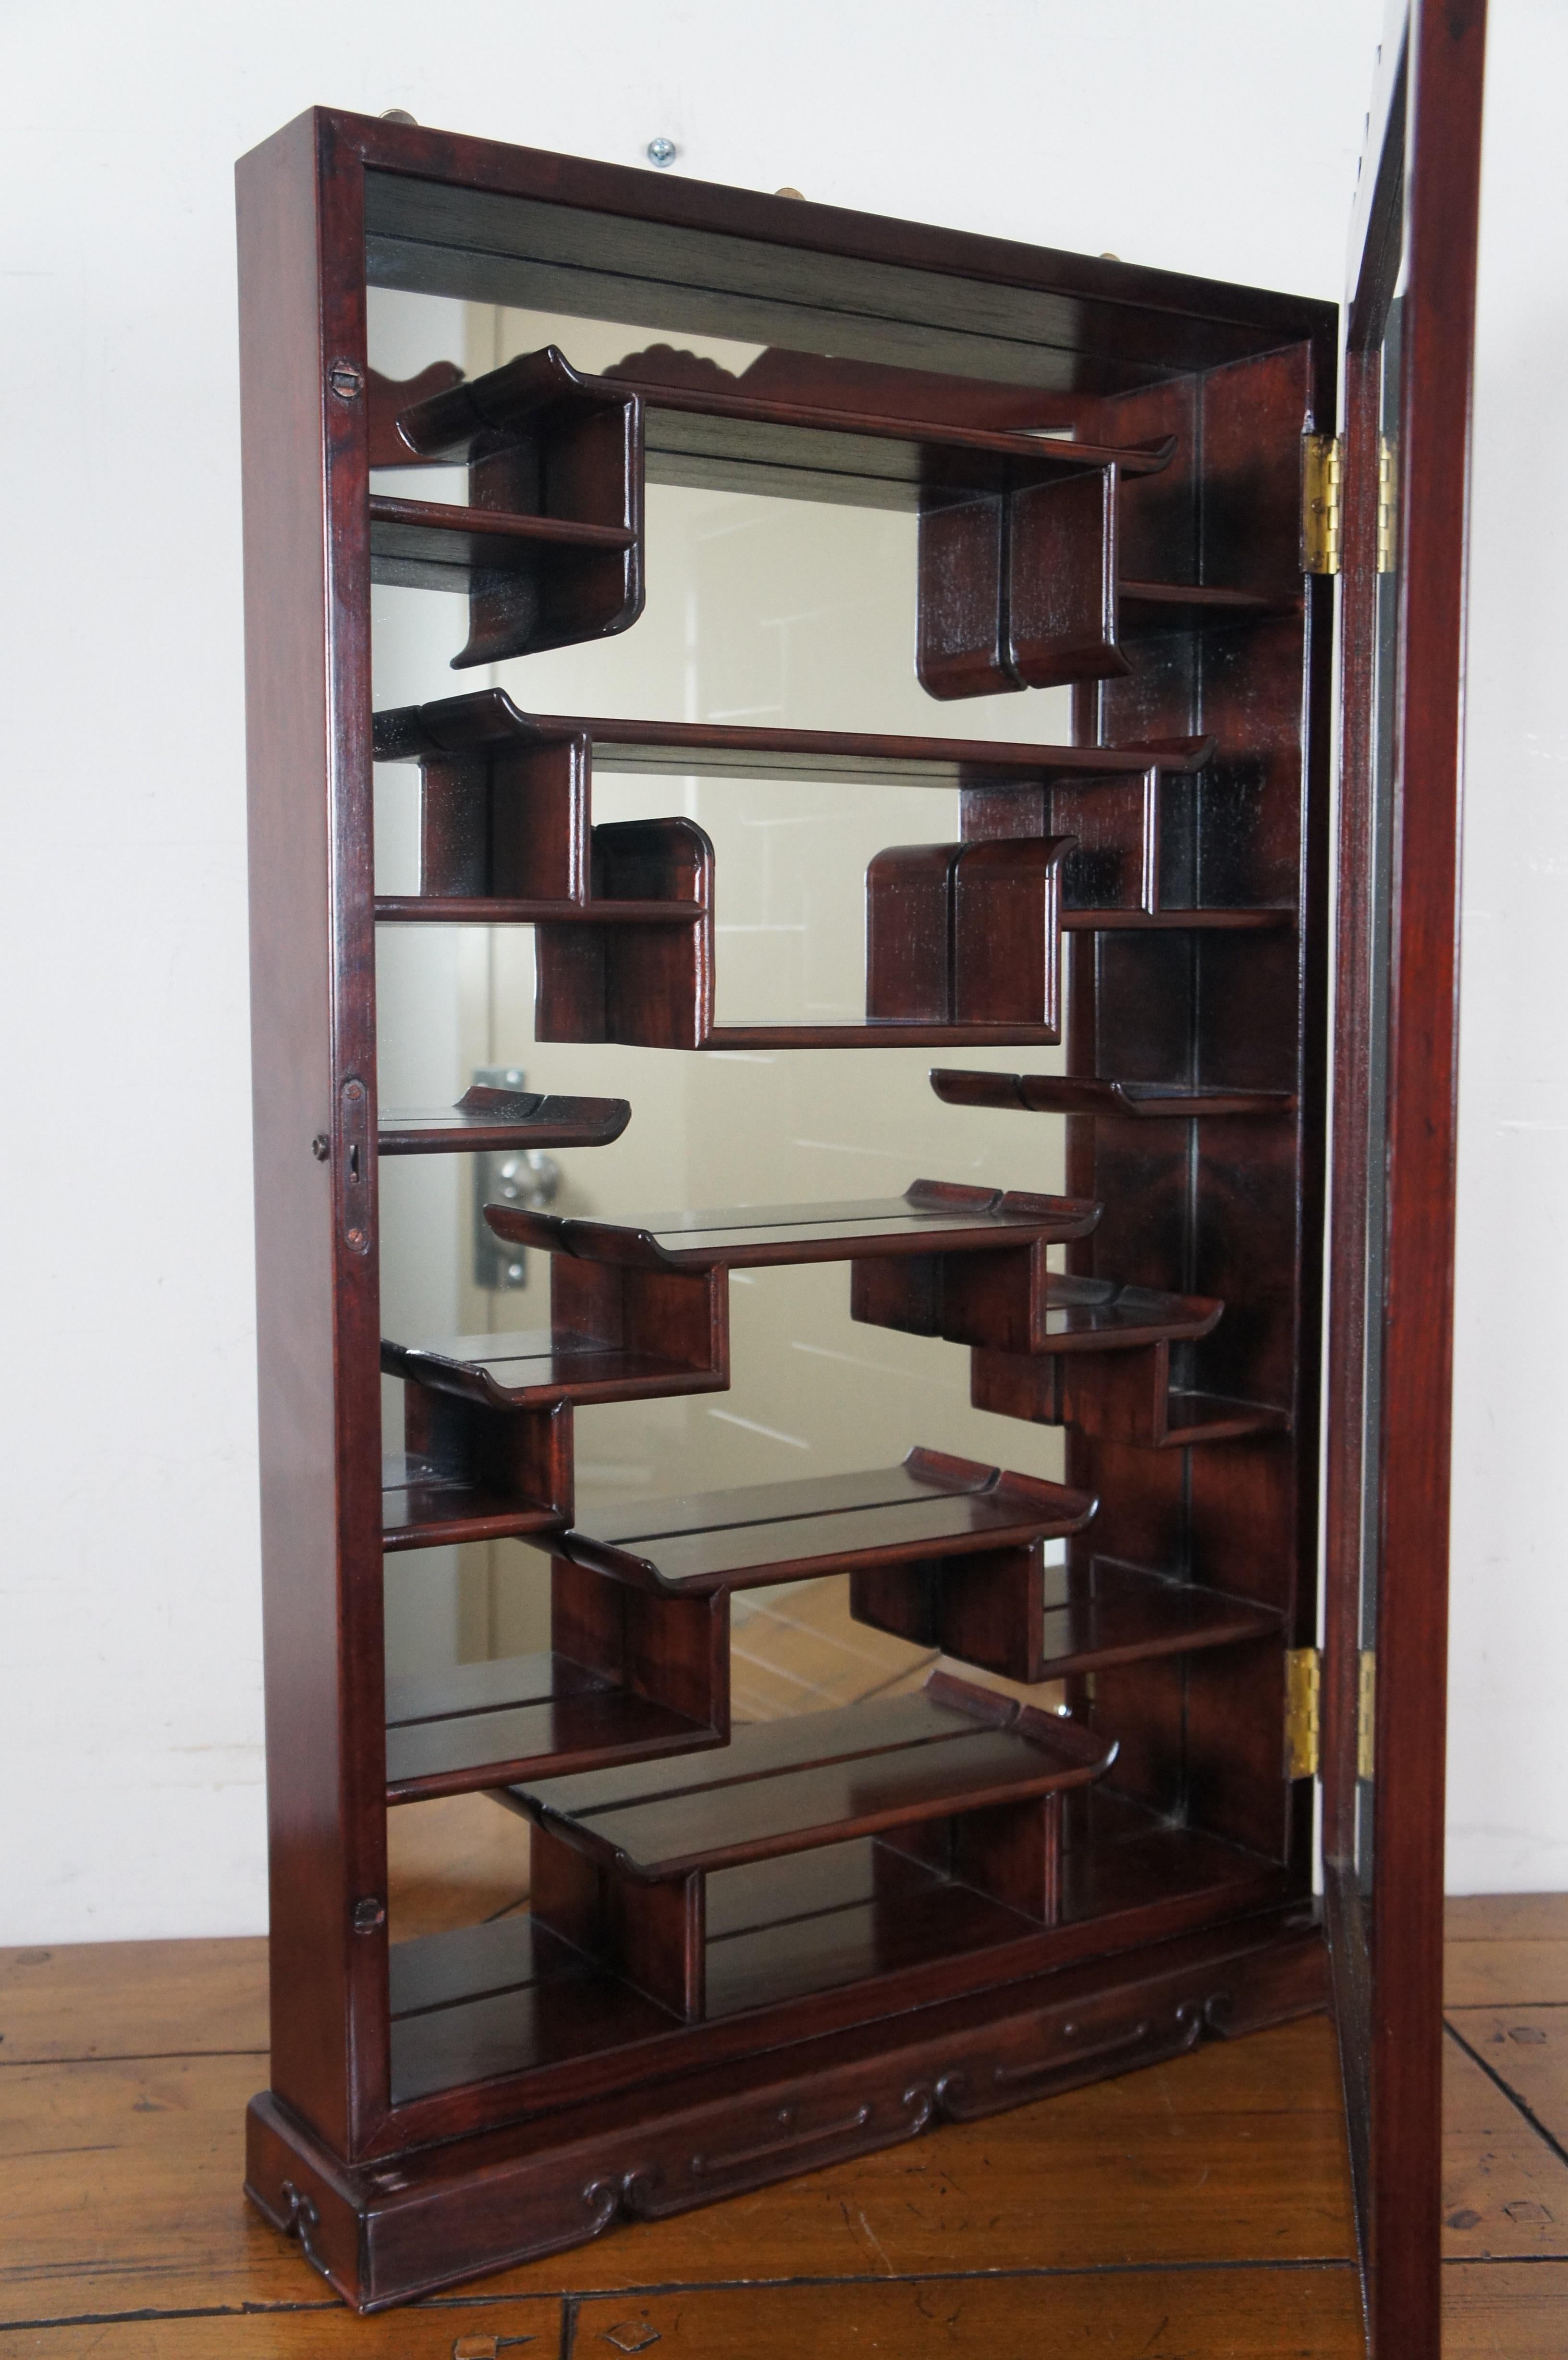 Vintage Chinese Chippendale Mahogany Mirrored Etagere Shelf Curio Cabinet 33